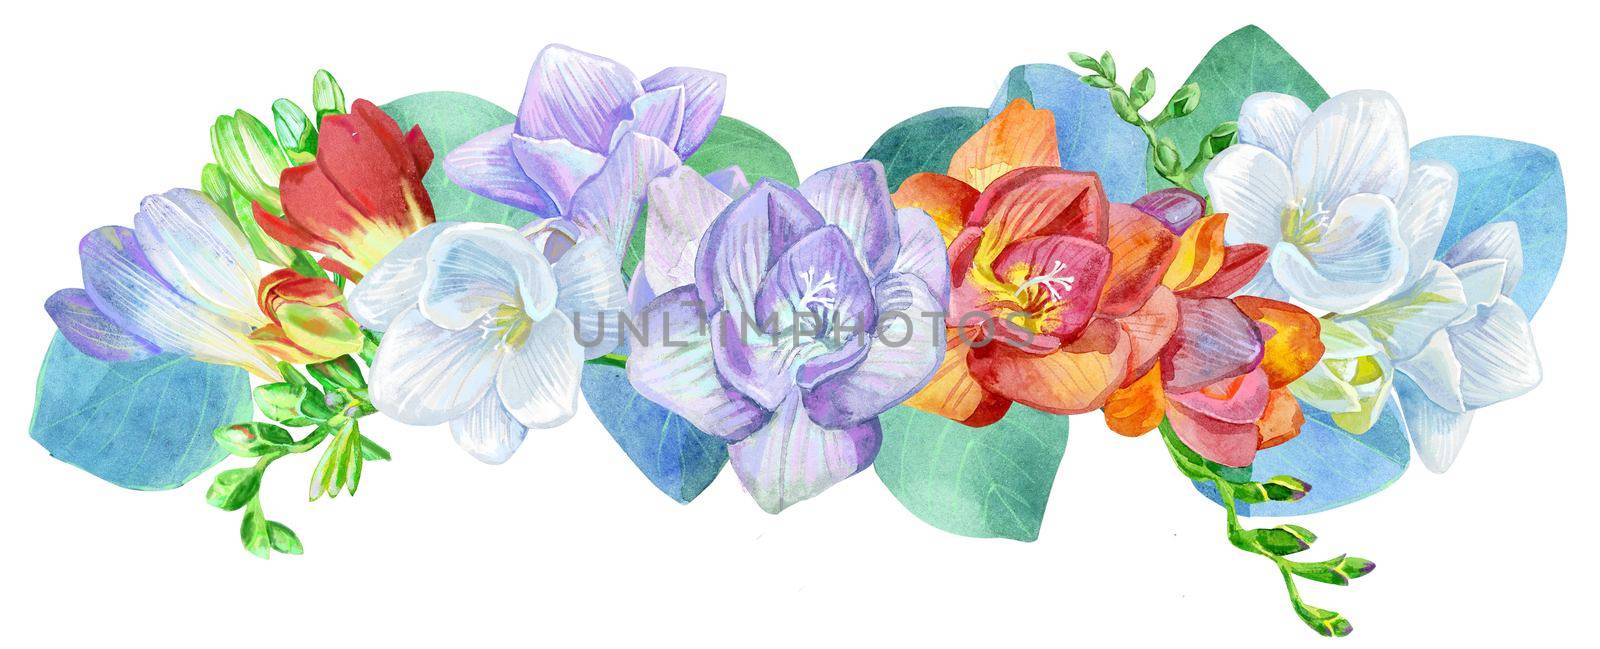 Watercolor illustration of freesia and eucalyptus border by NataOmsk